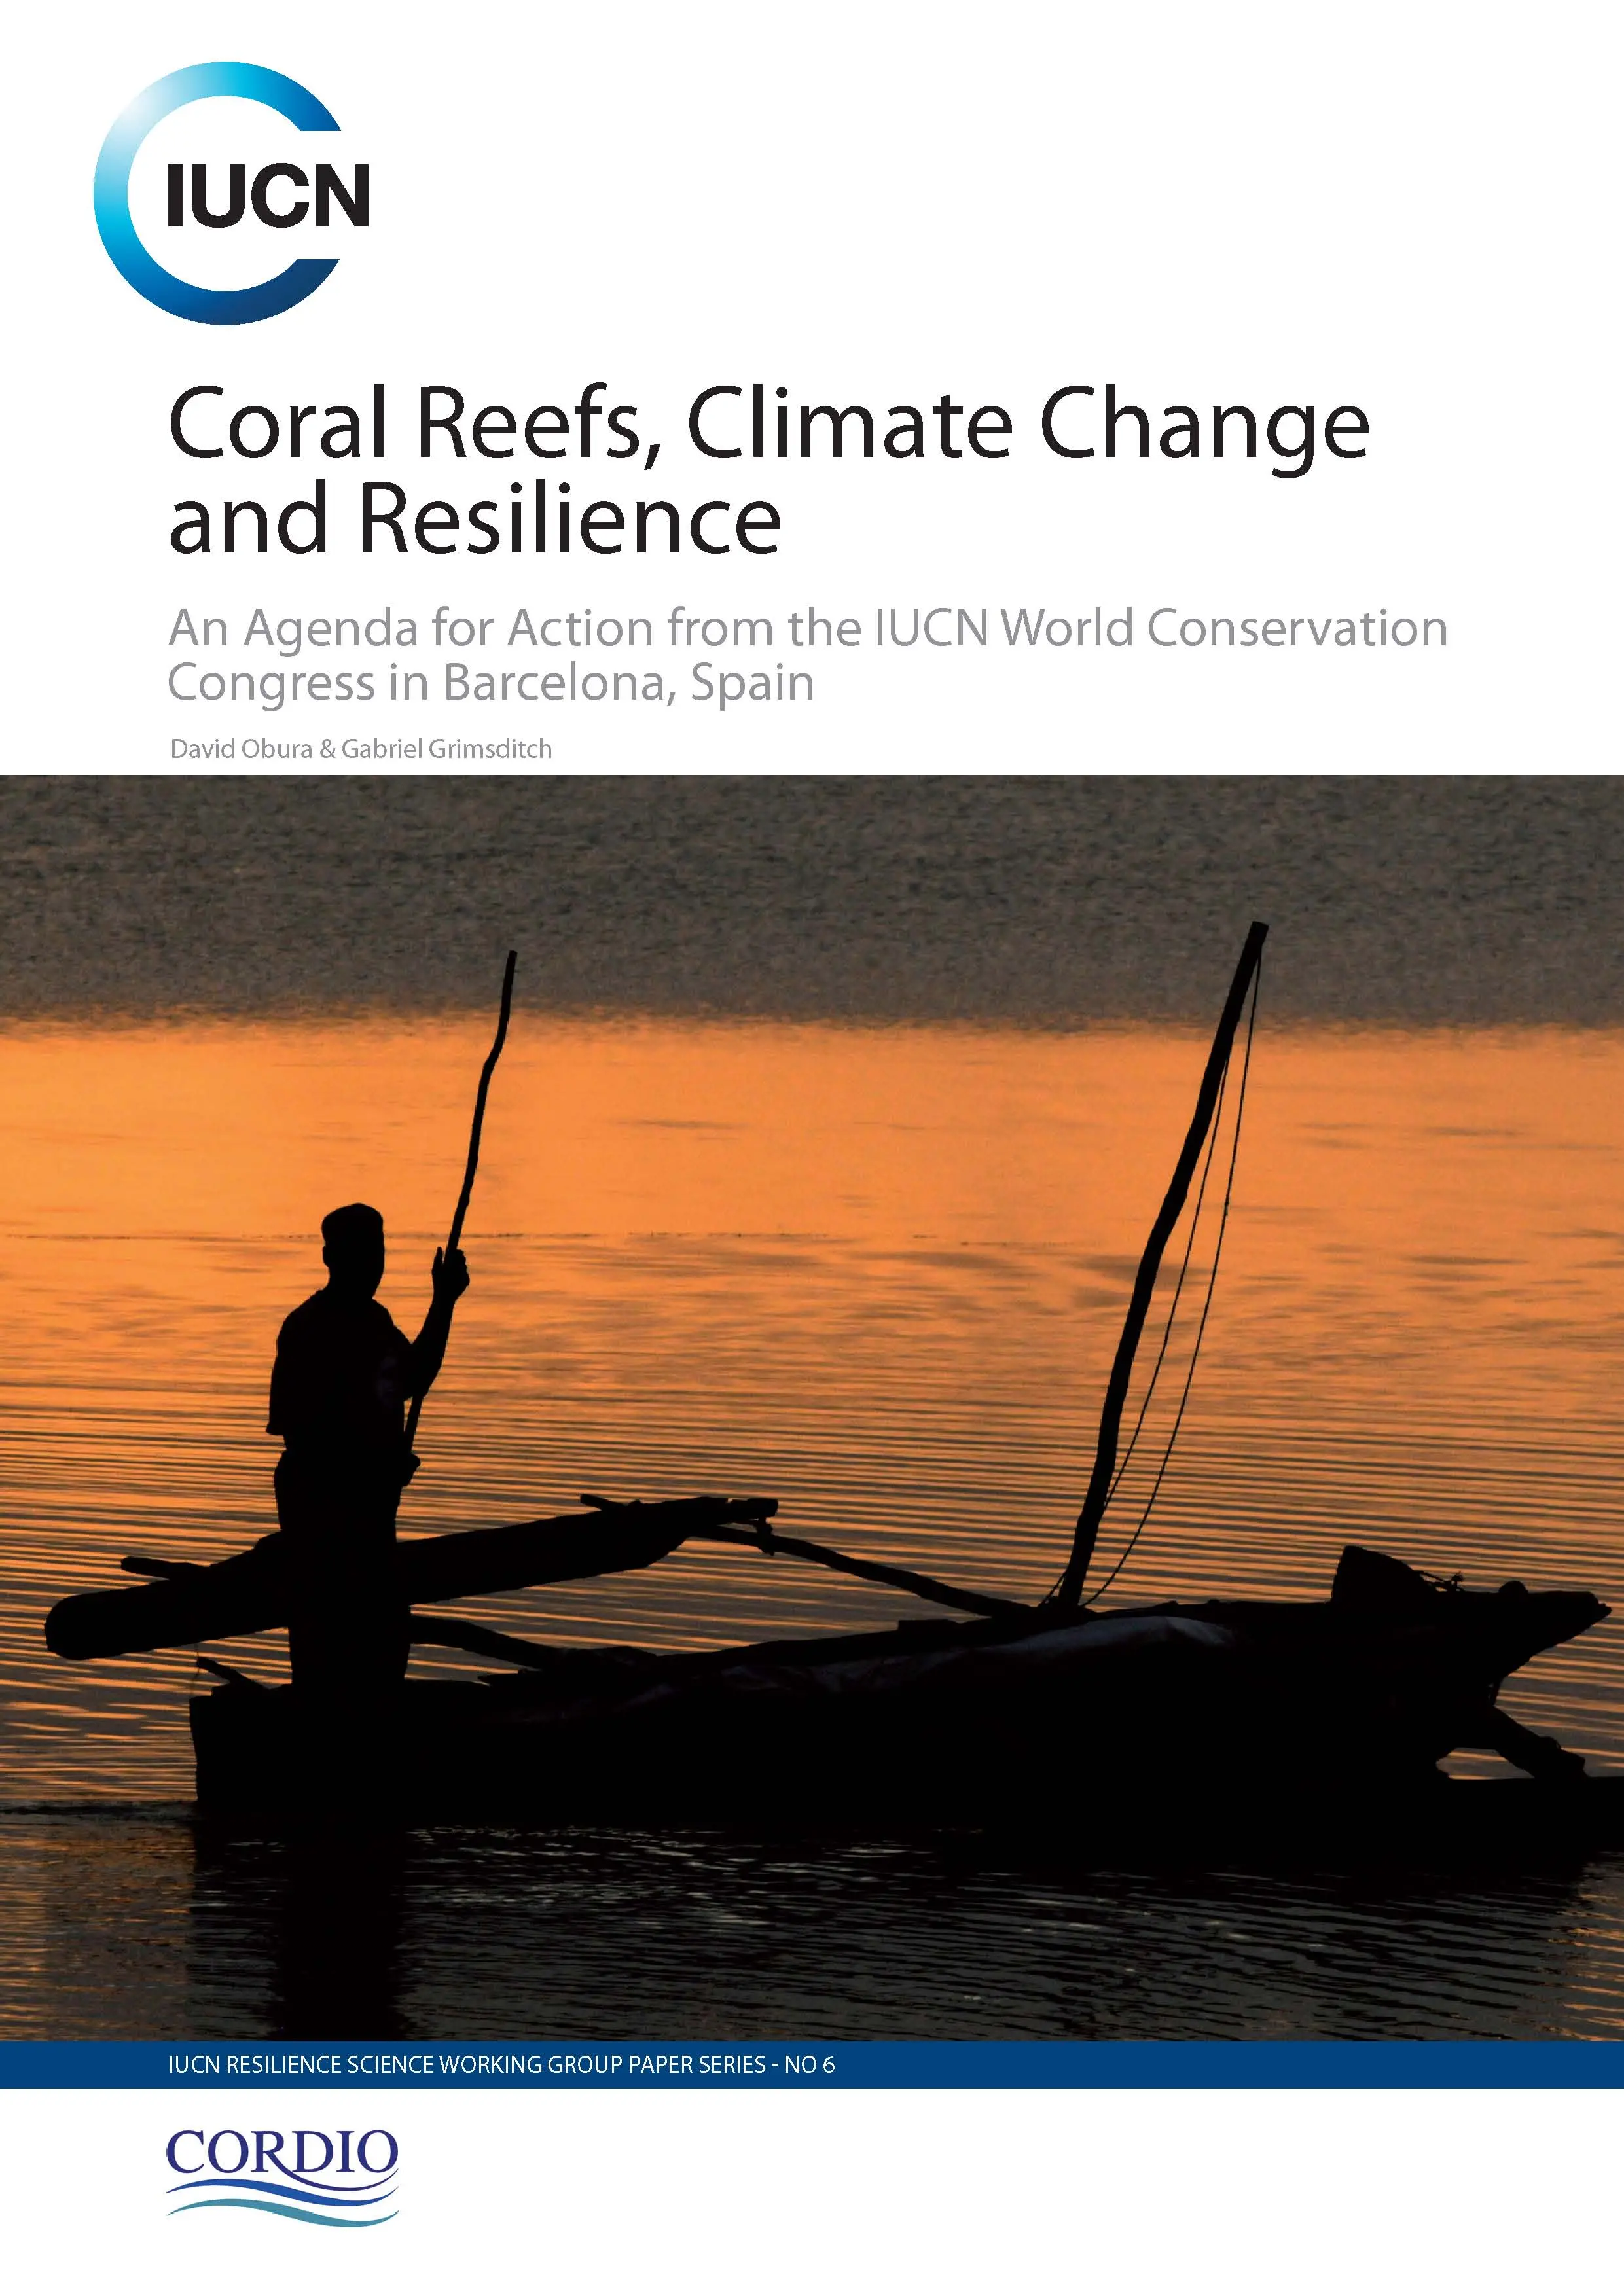 Coral Reefs, Climate Change and Resilience
An Agenda for Action from the IUCN World Conservation Congress in Barcelona, Spain